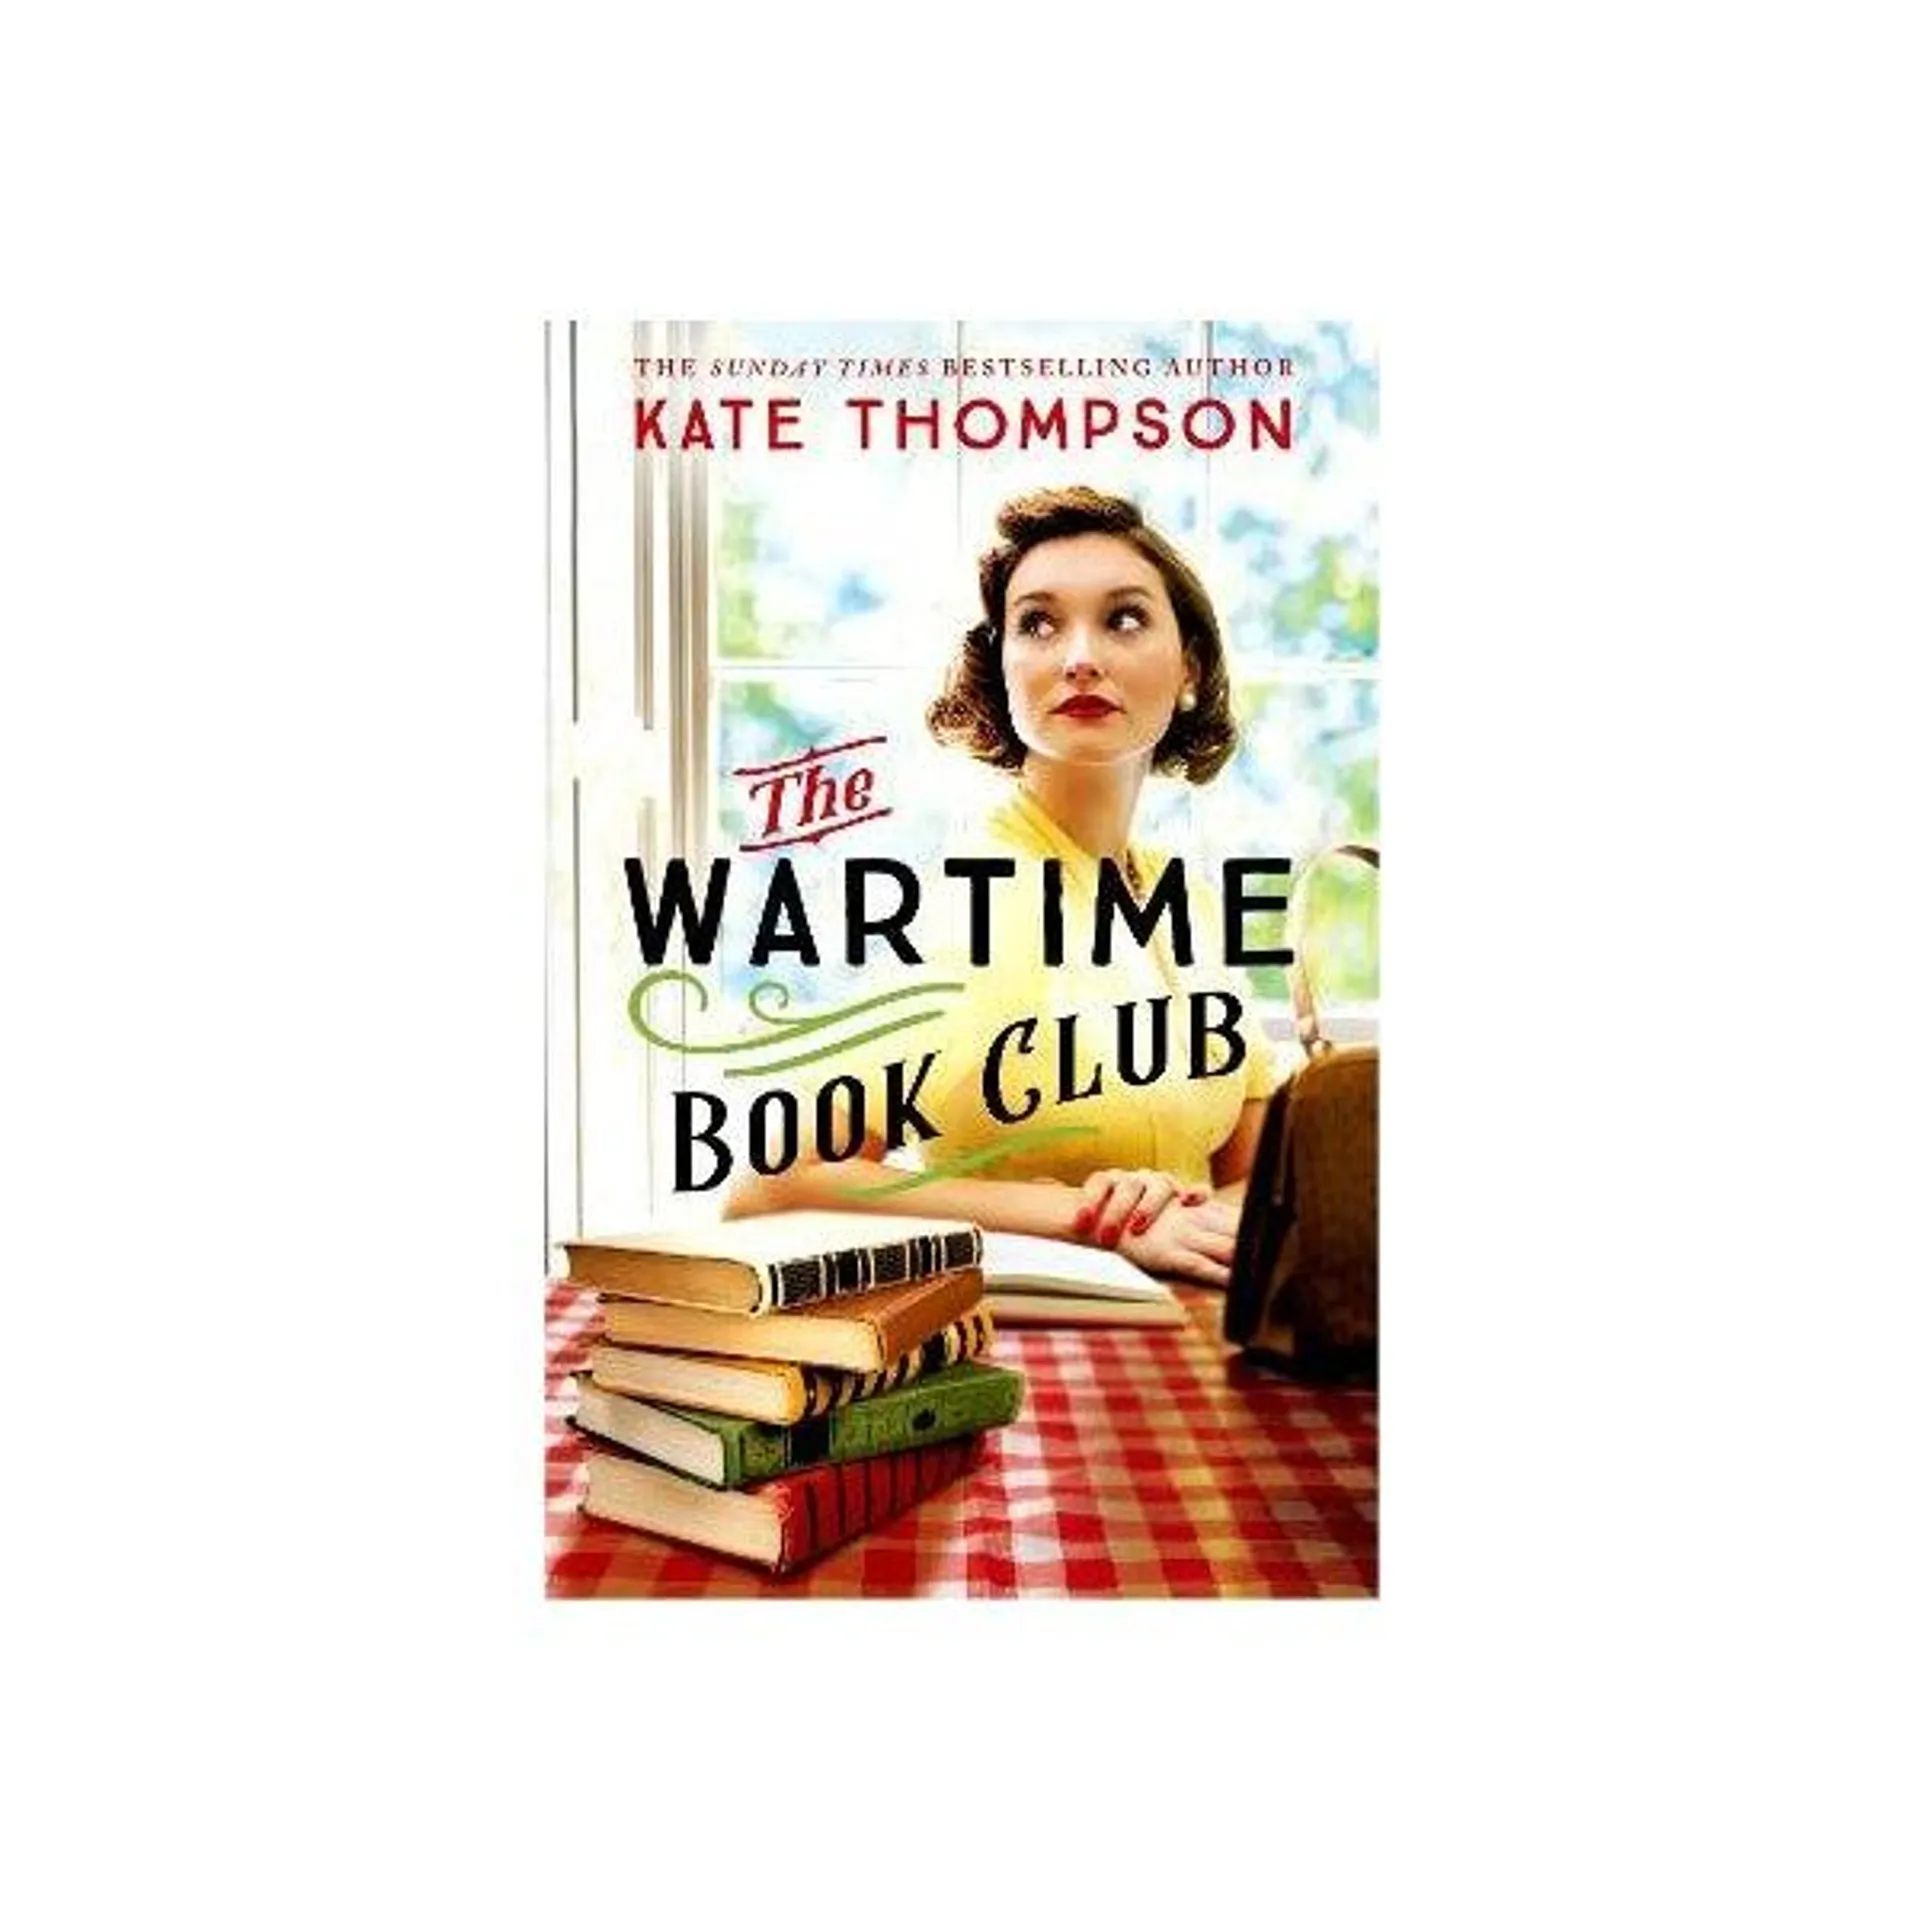 The Wartime Book Club